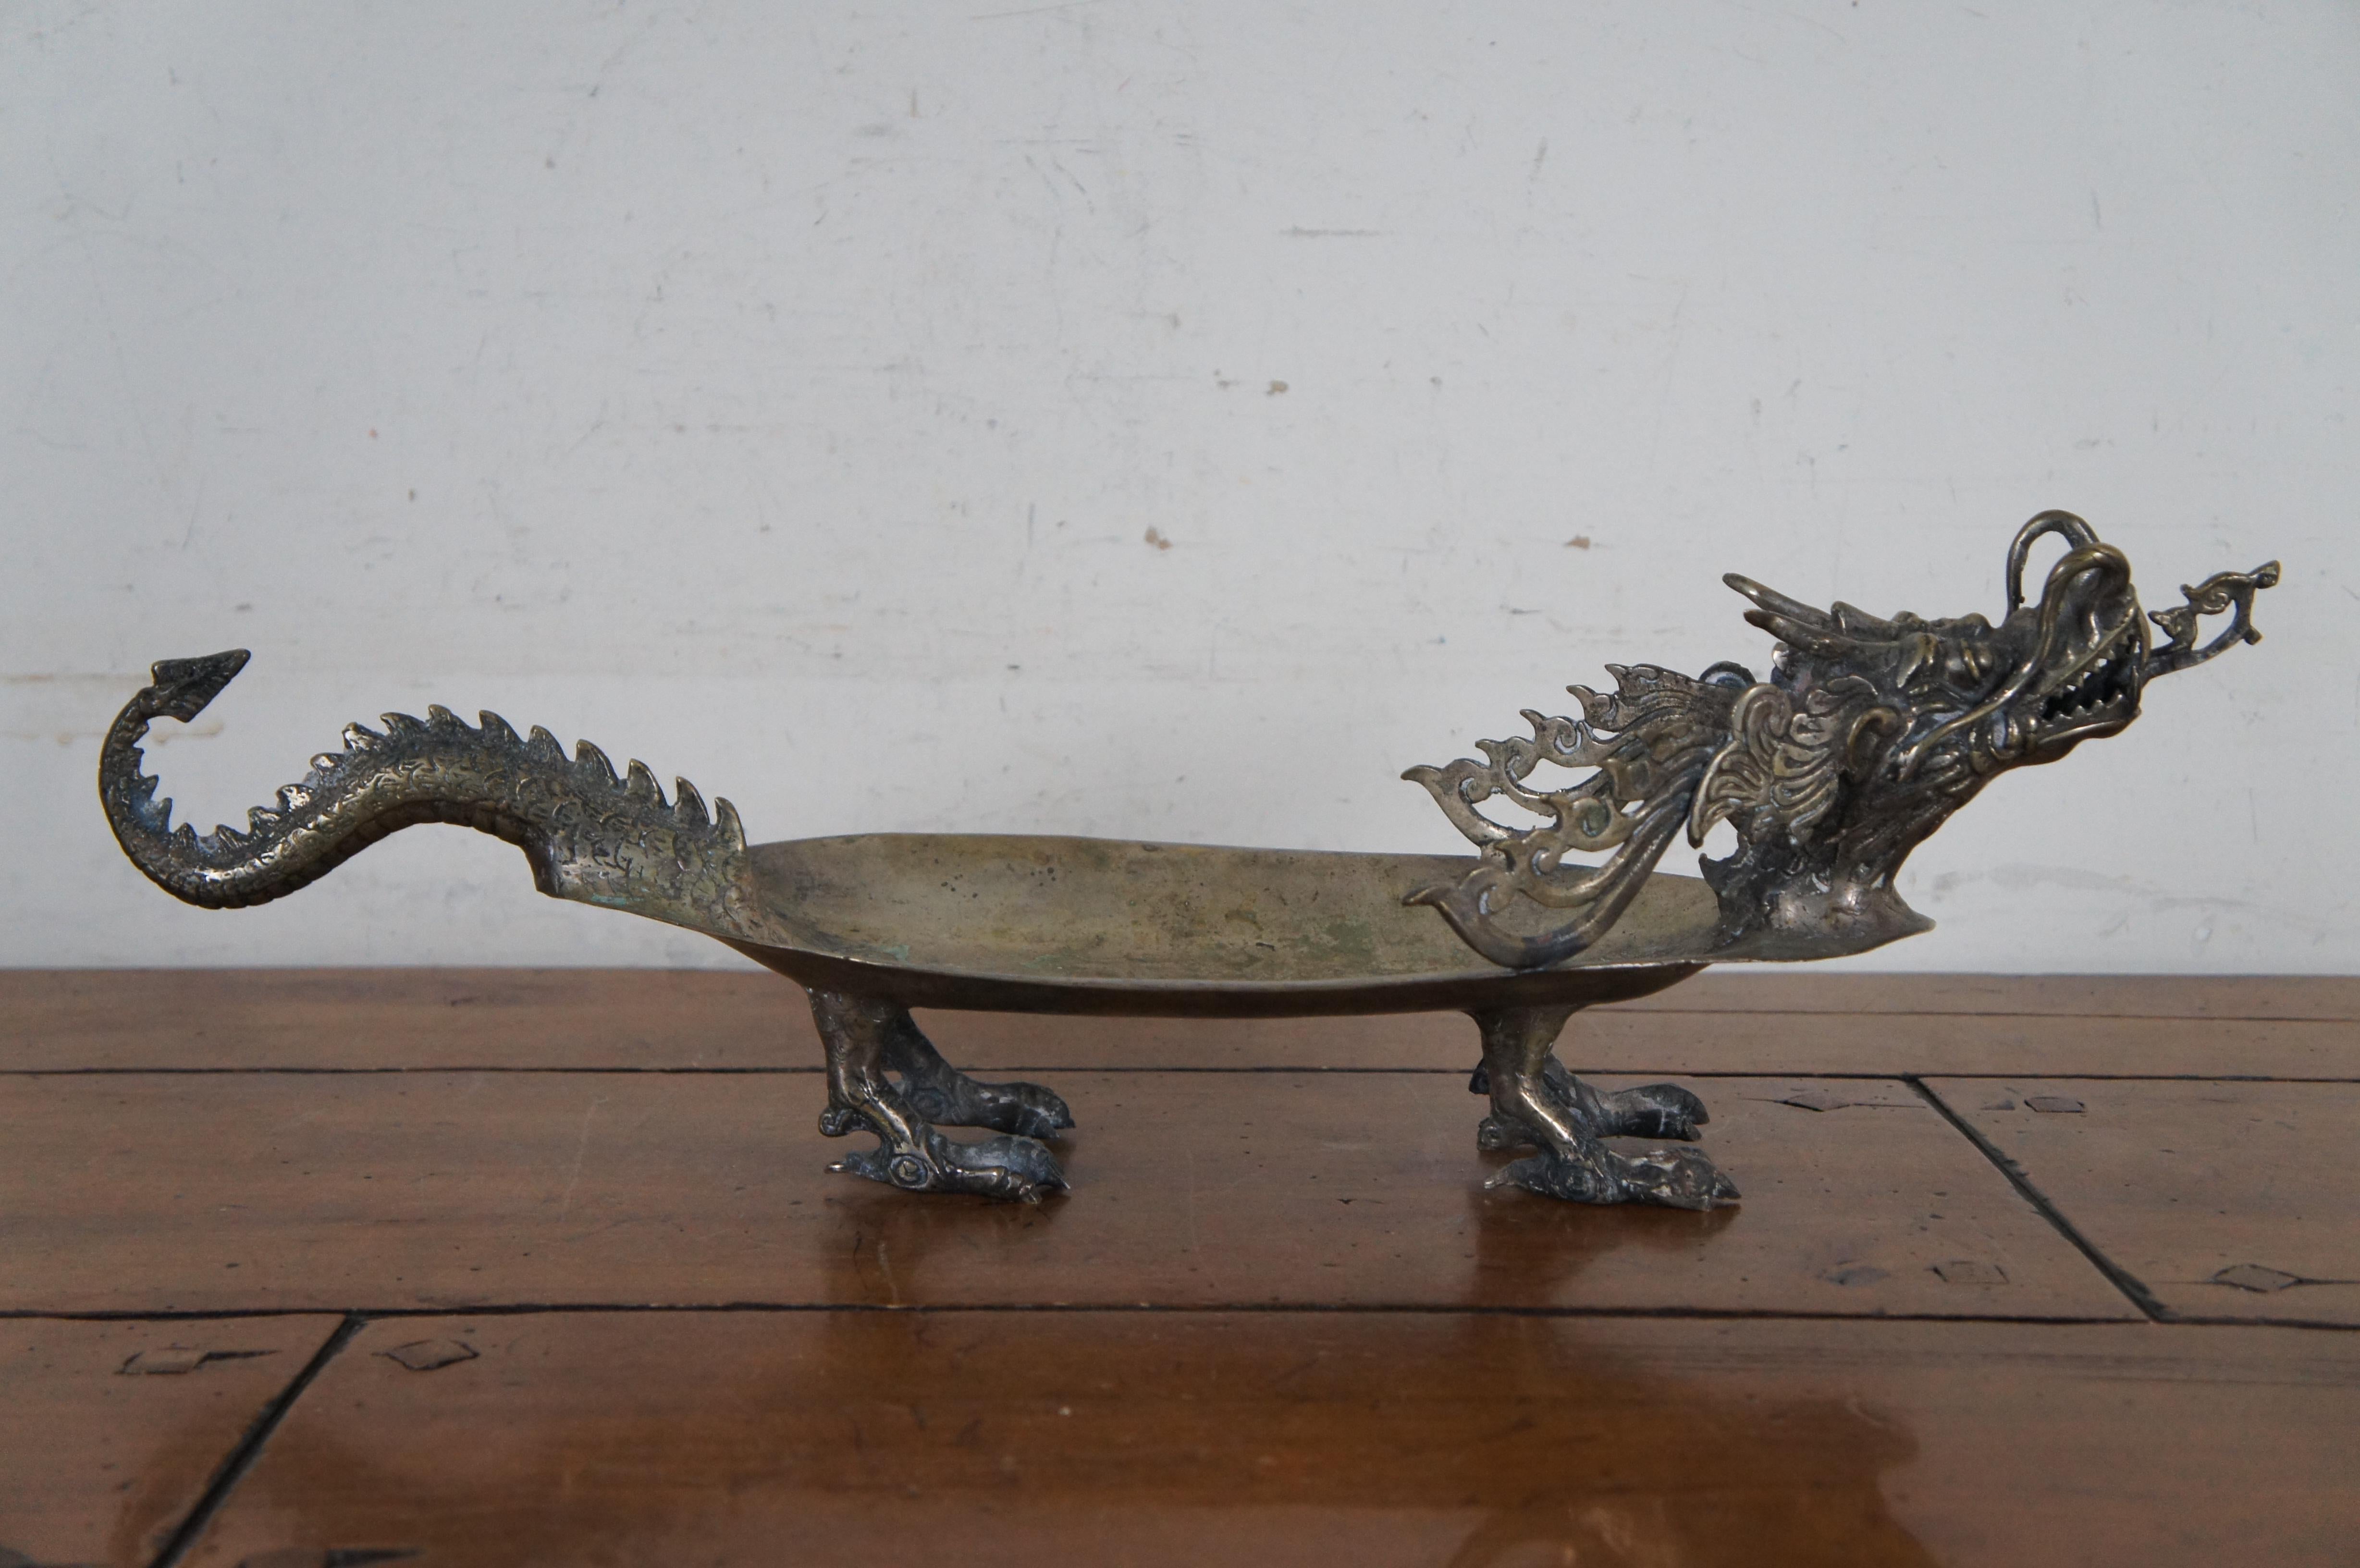 Vintage Bronze Sculptural Chinese Dragon Centerpiece Serving Tray Bowl Compote 2 In Good Condition For Sale In Dayton, OH